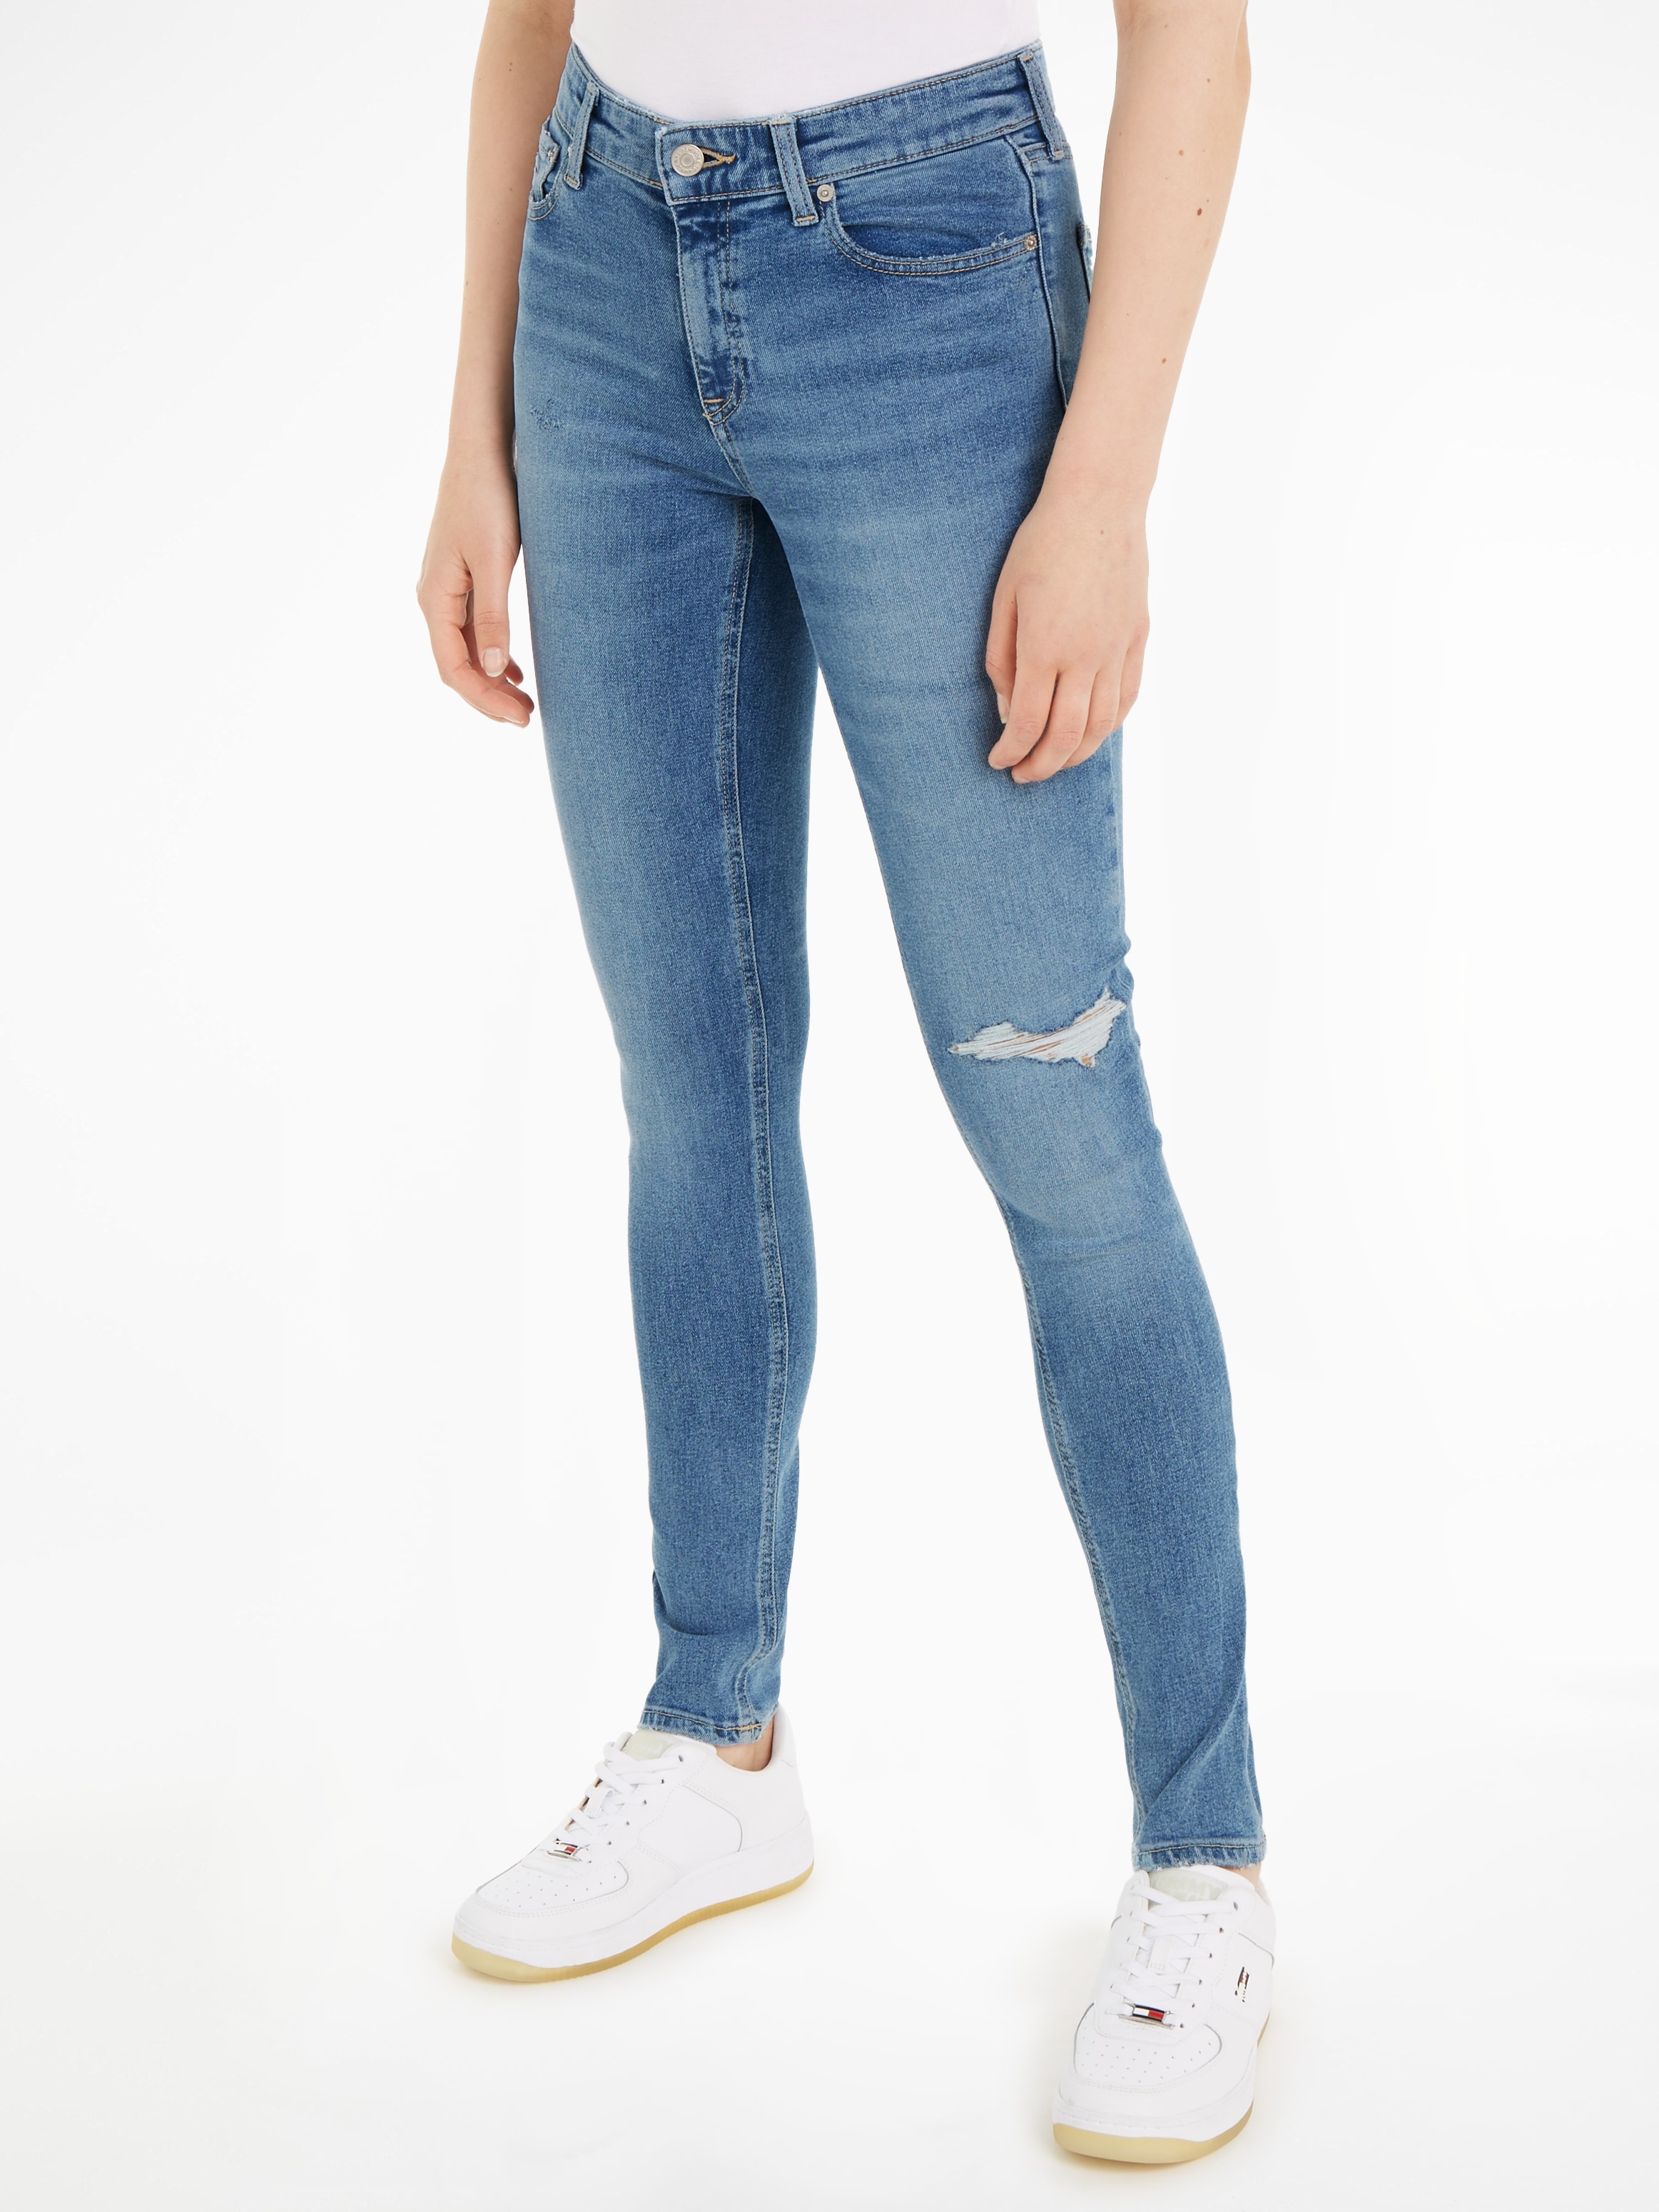 Skinny-fit-Jeans »Nora«, mit Tommy Jeans Markenlabel & Badge